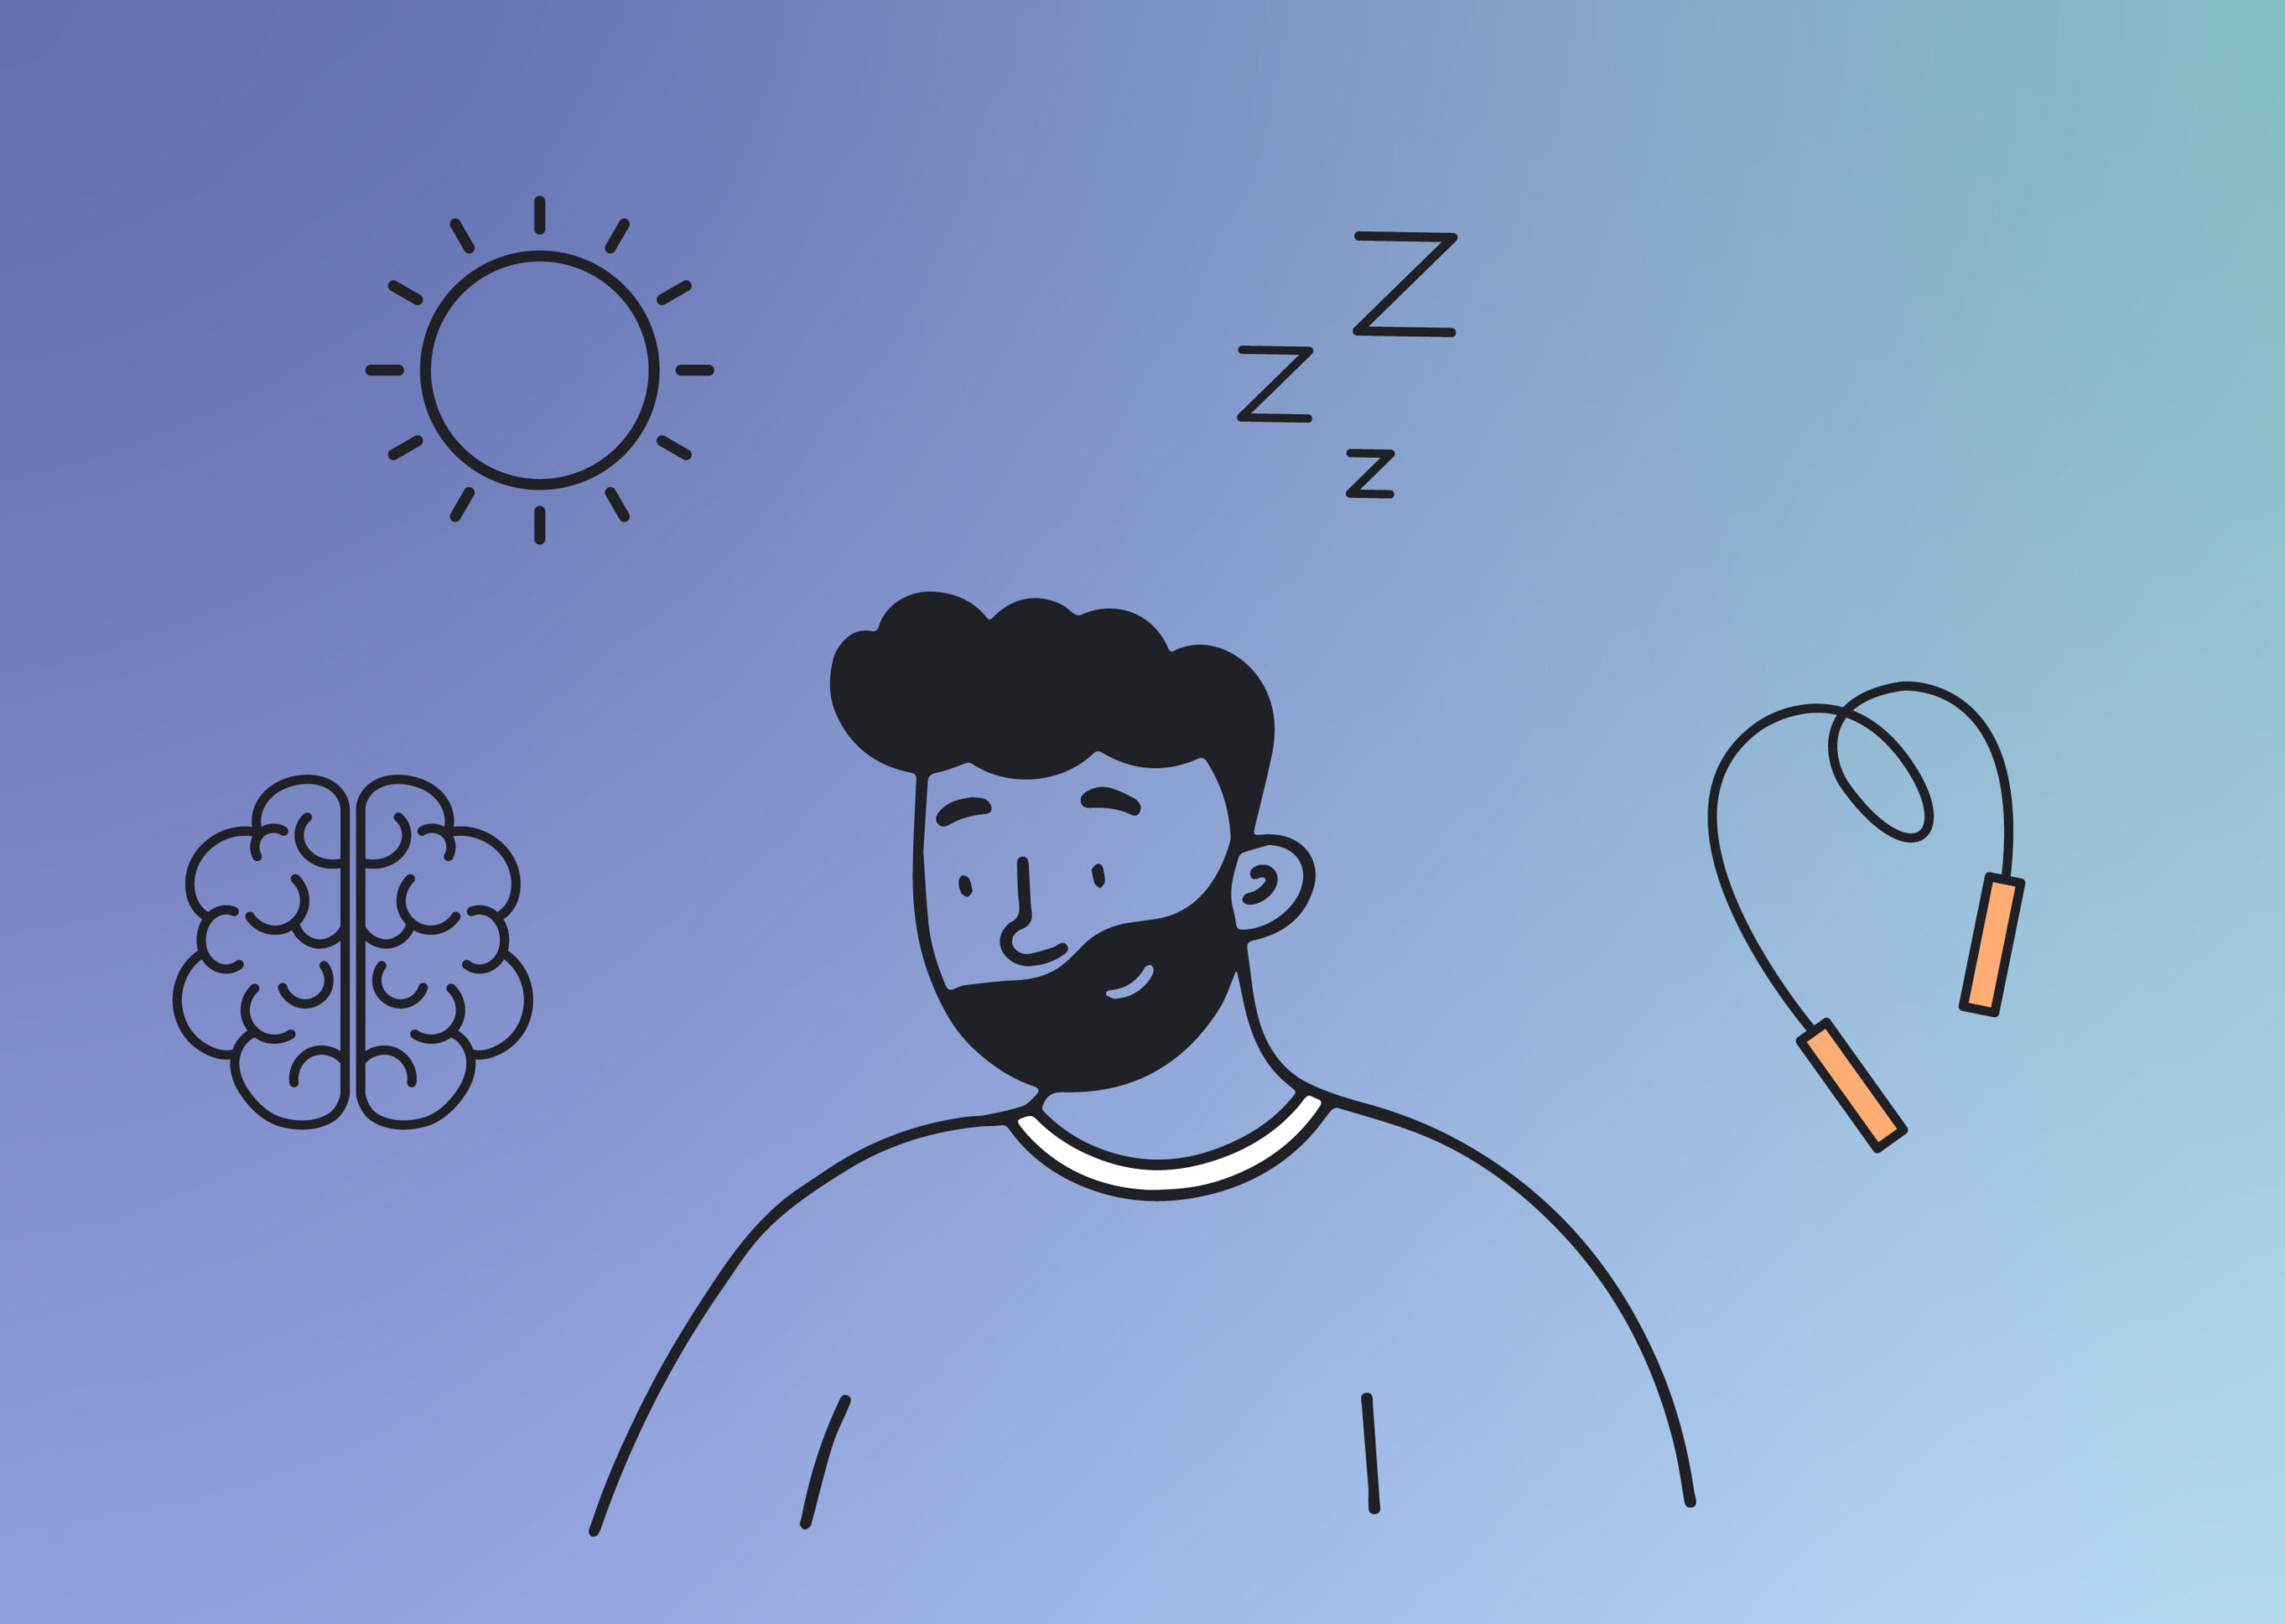 man surrounded by jump rope, sun, brain, and Zzz's